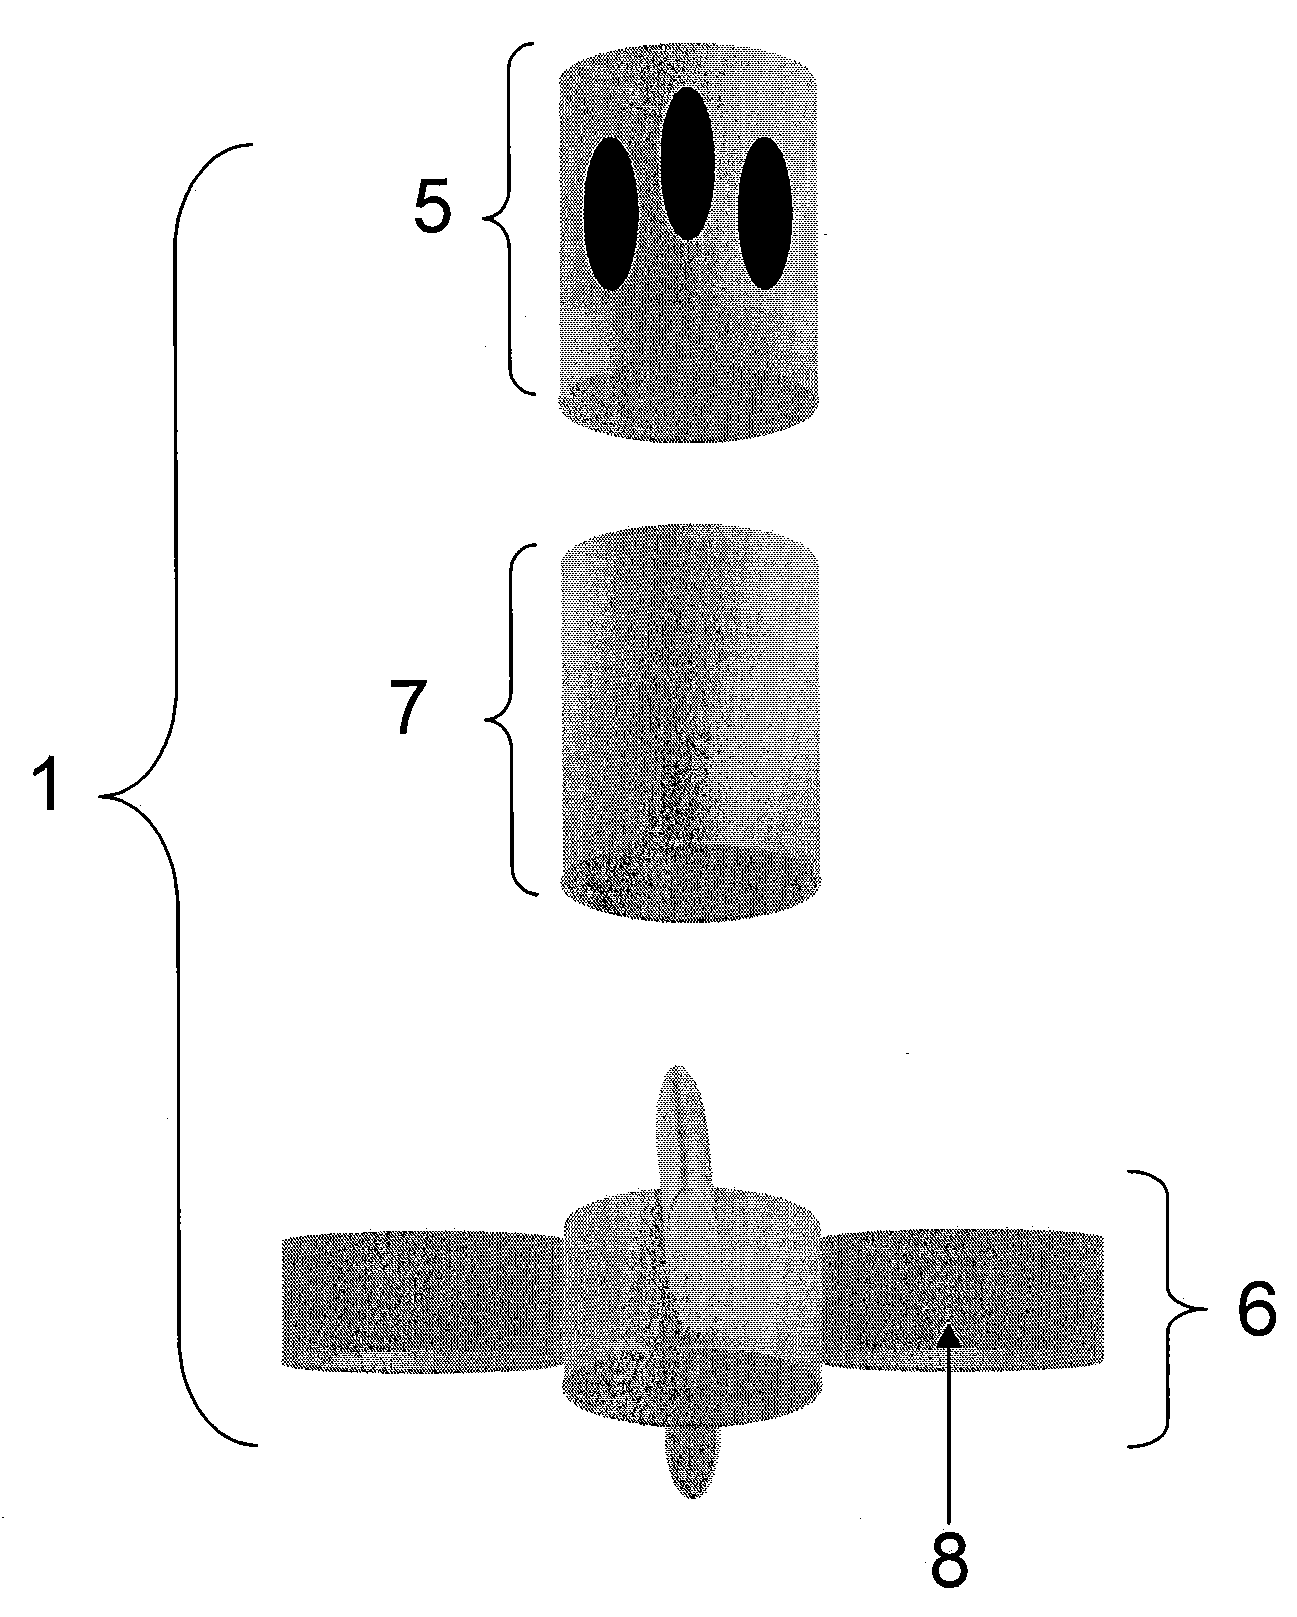 Hand and forearm strengthening device and methods of use